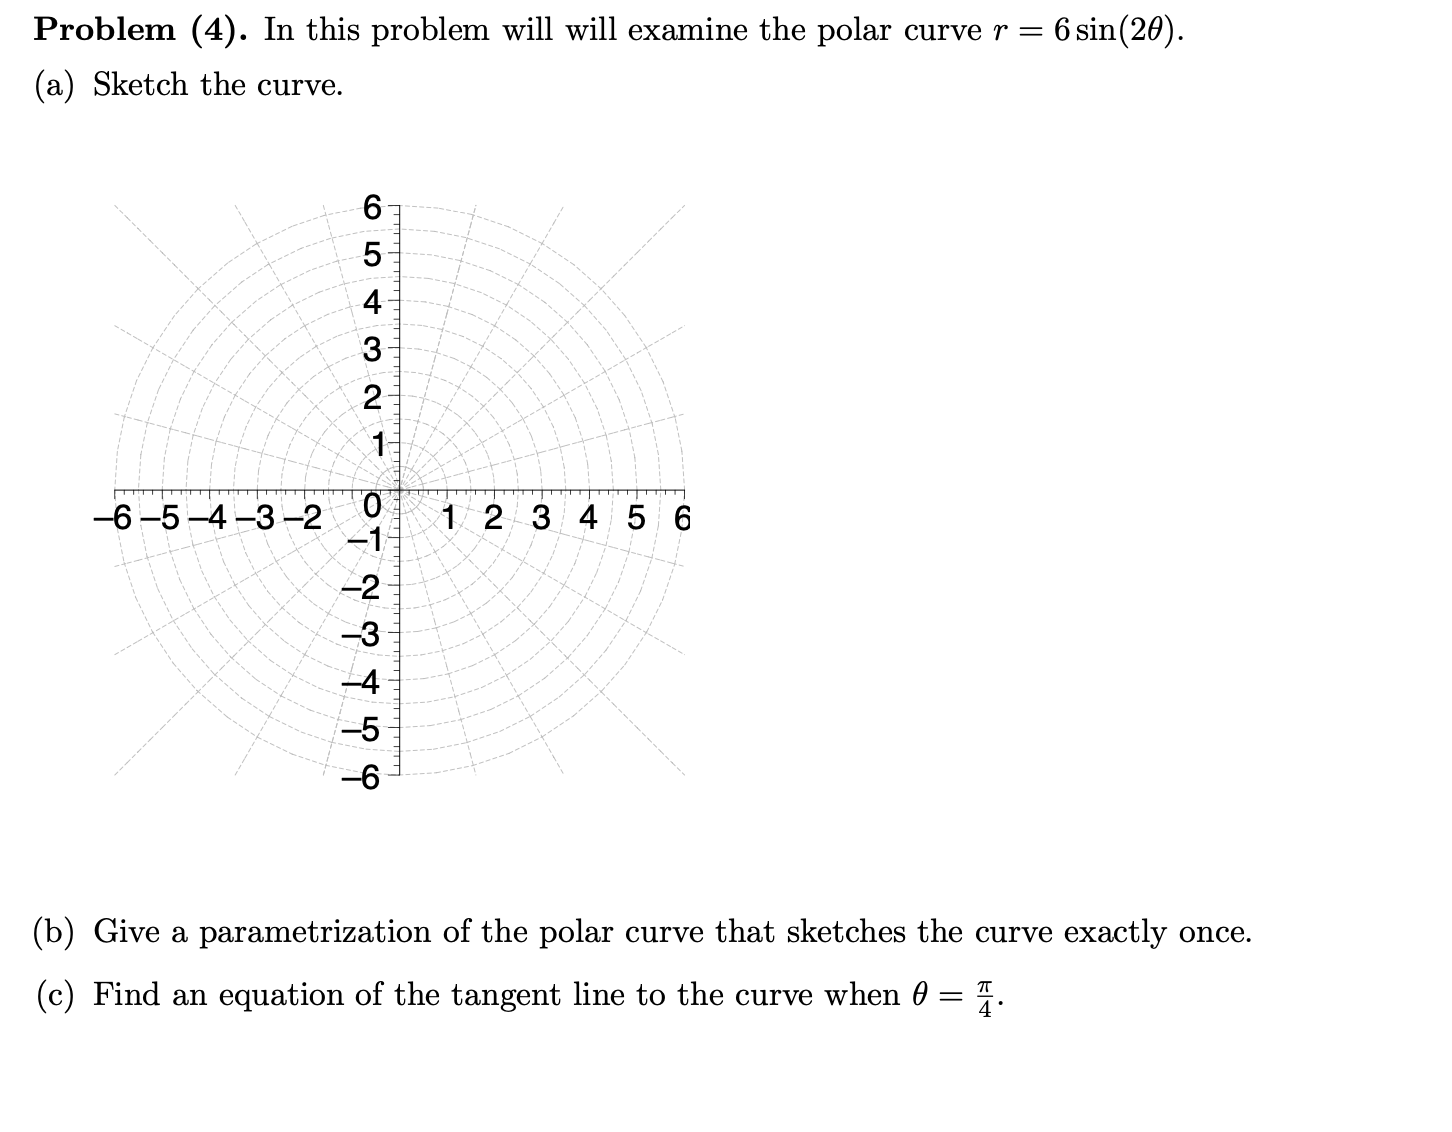 Problem (4). In this problem will will examine the polar curve r =
6 sin(20).
(a) Sketch the curve.
6.
-6 -5 -4 -3-2
1 2 3 4 5 6
-1
-2
-3
-5
-6
(b) Give a parametrization of the polar curve that sketches the curve exactly once.
(c) Find an equation of the tangent line to the curve when 0 = 4.
